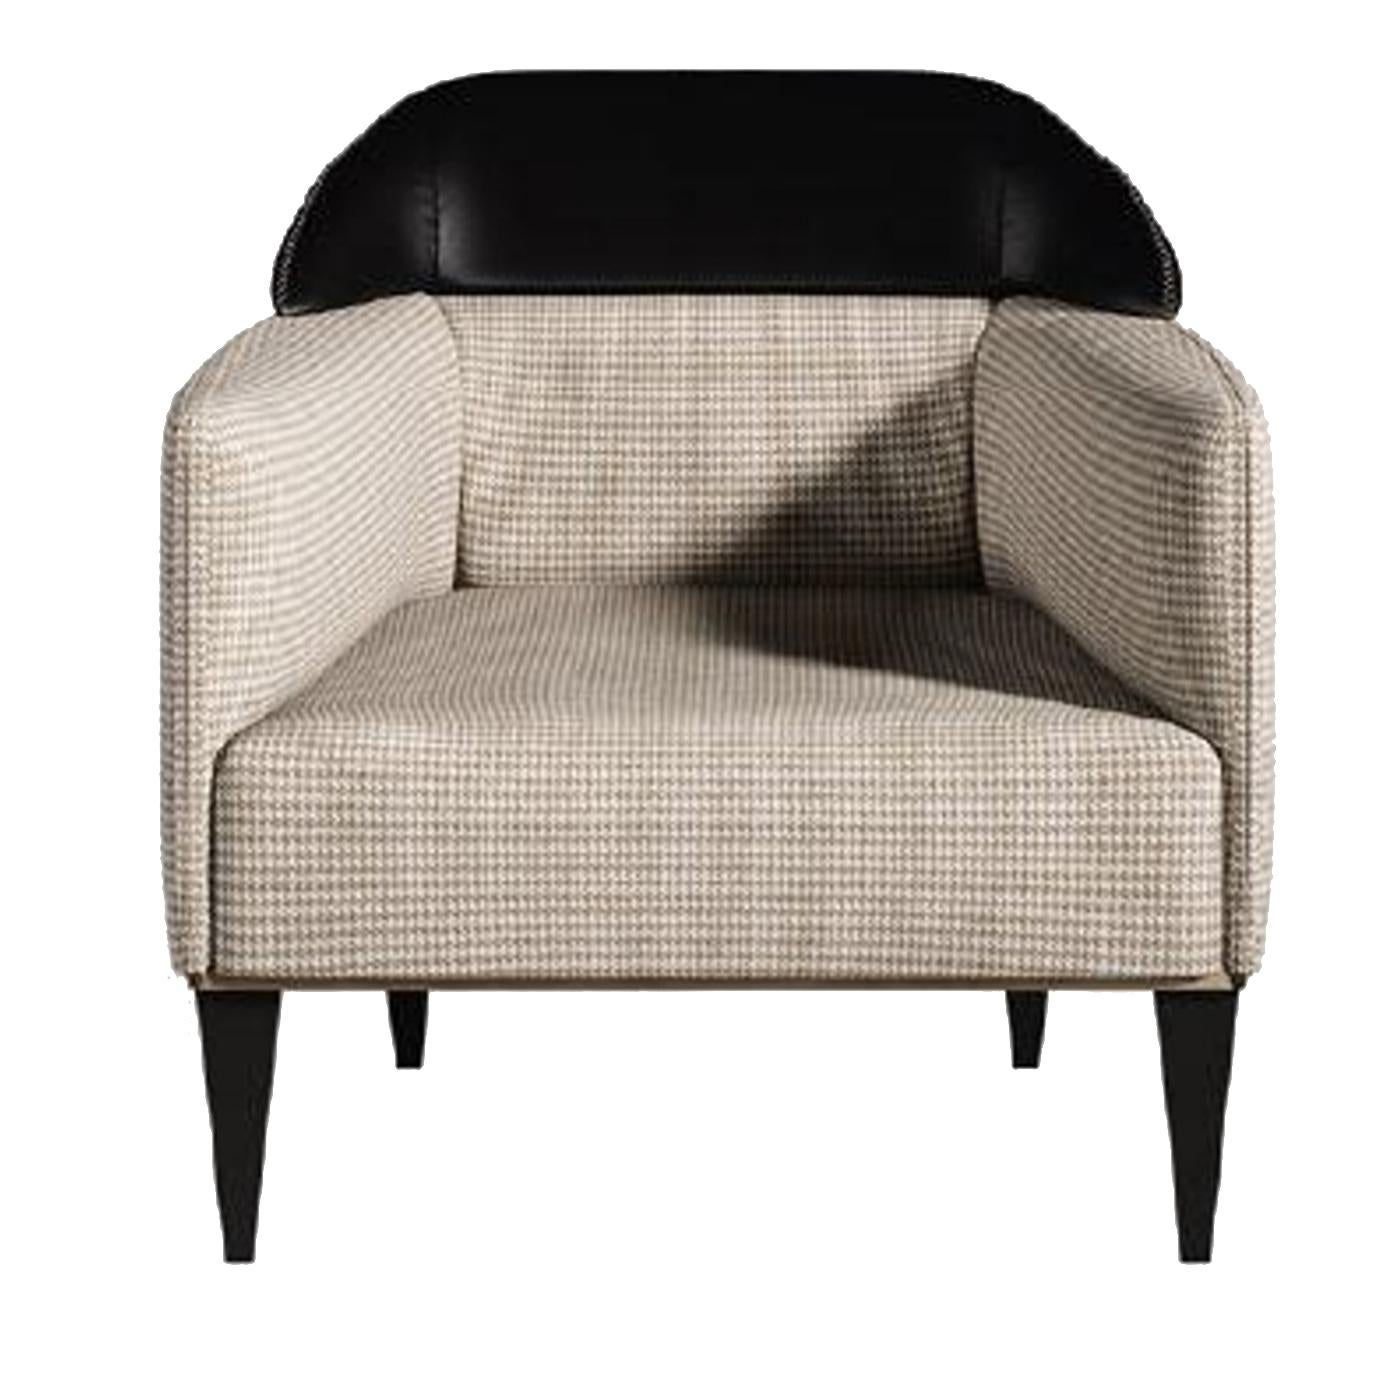 Purposefully designed to let the black leather take centre stage, the Minimalist profile of this sophisticated armchair is enhanced by the barrel arms that hug the comfortable, deep cushion seat. The dark, conical legs play off the textured ivory